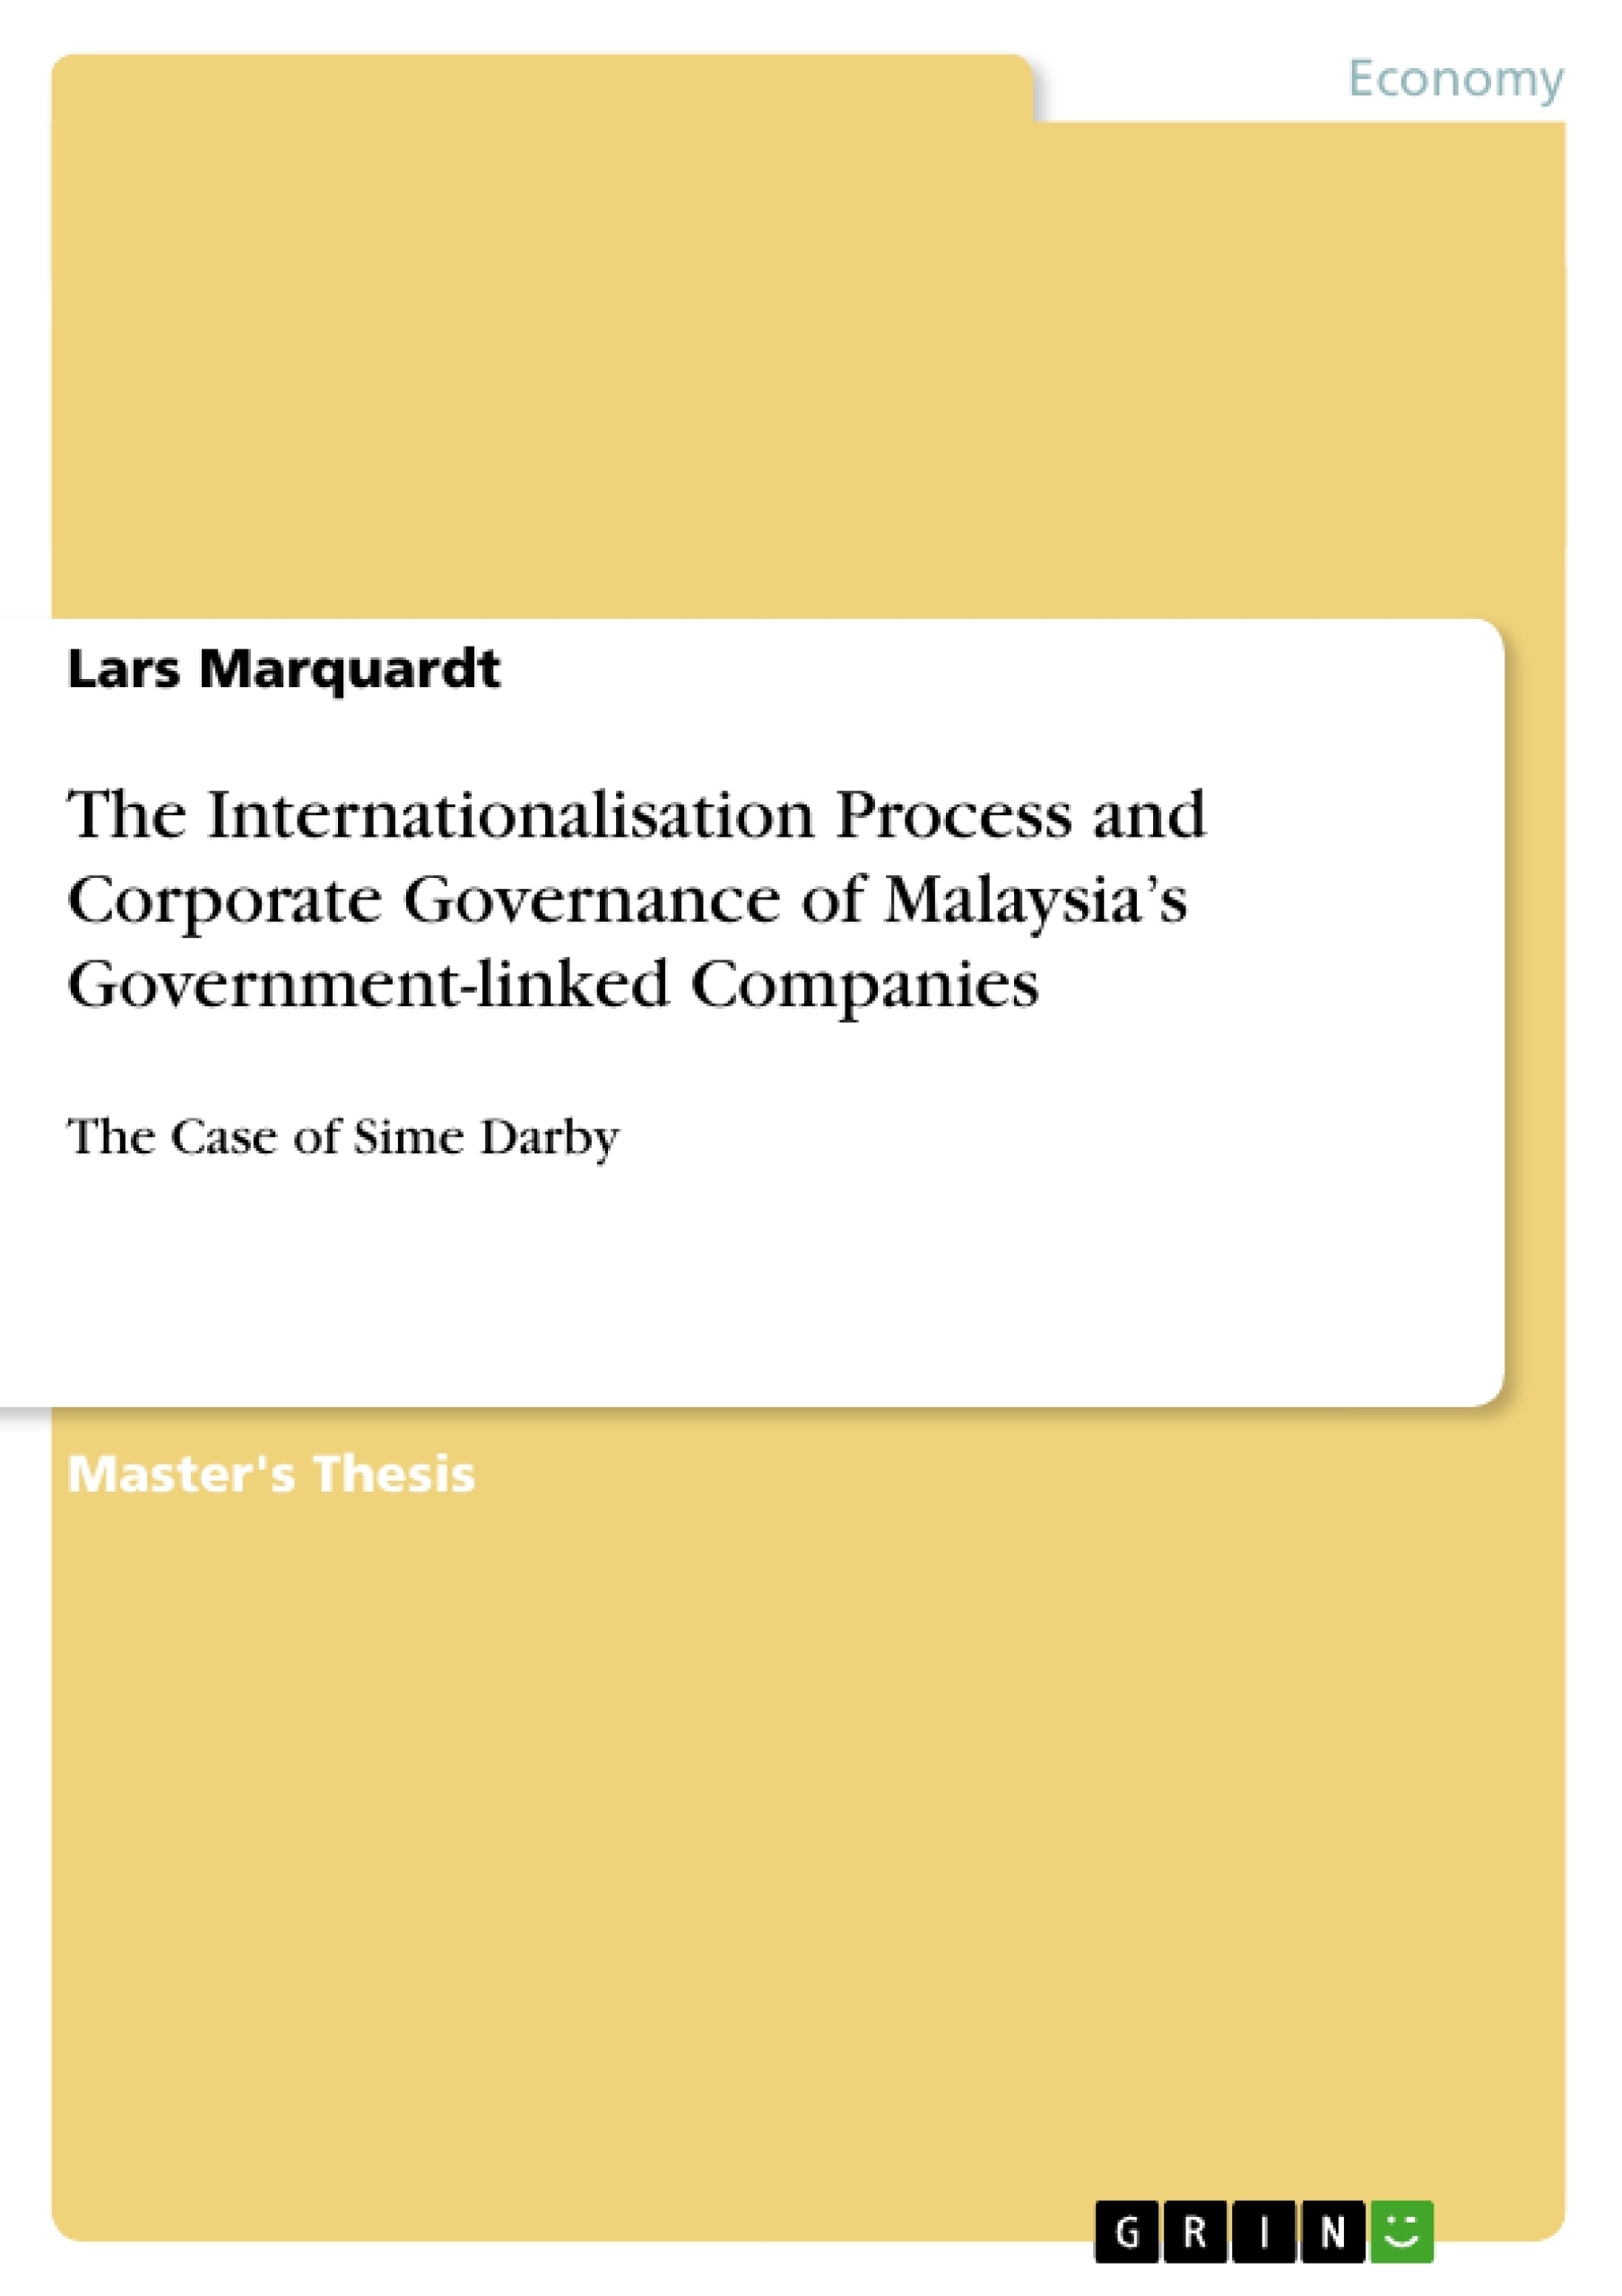 Title: The Internationalisation Process and Corporate Governance of Malaysia’s Government-linked Companies